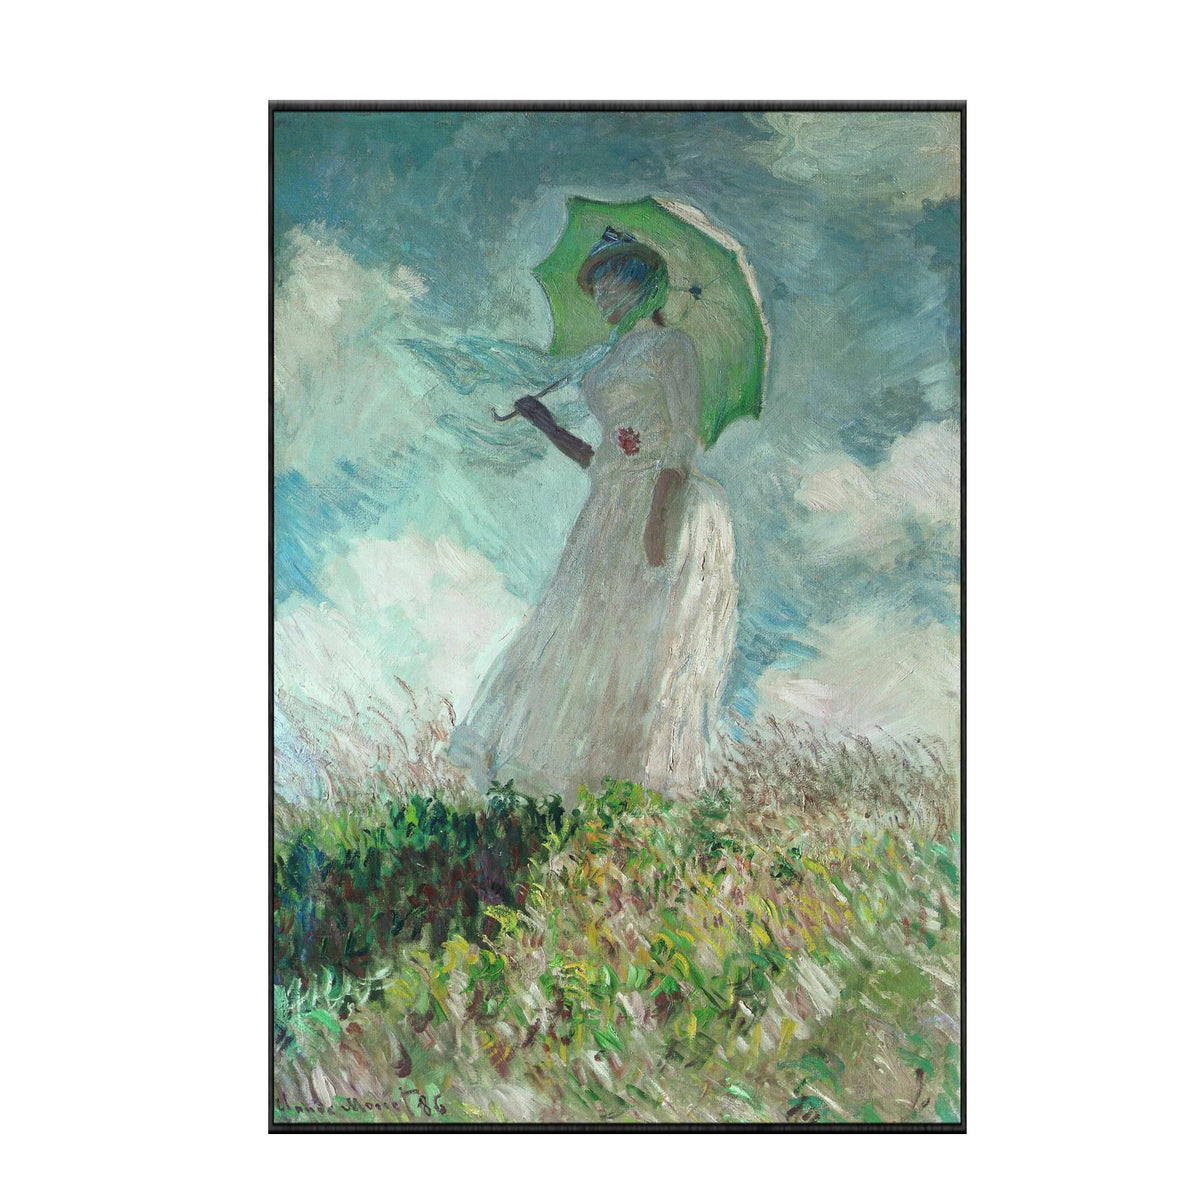 Claude Monet Poppy Fields Impressionist Landscape Oil Painting On Canvas Posters And Wall Prints For Living Room